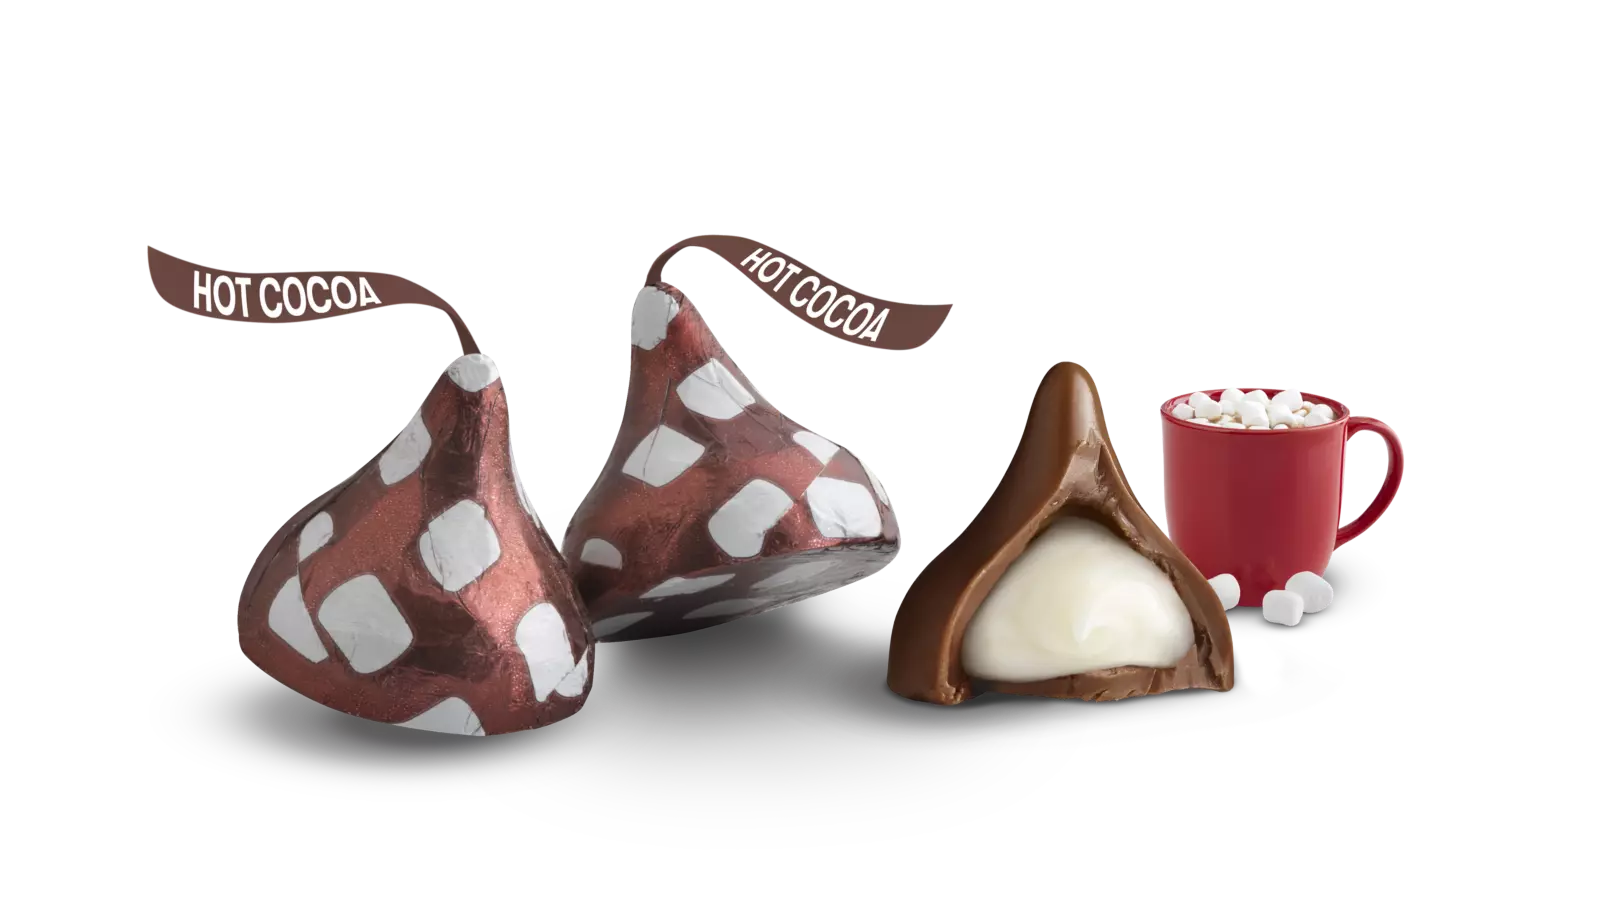 HERSHEY'S KISSES Hot Cocoa Candy, 7 oz bag - Out of Package